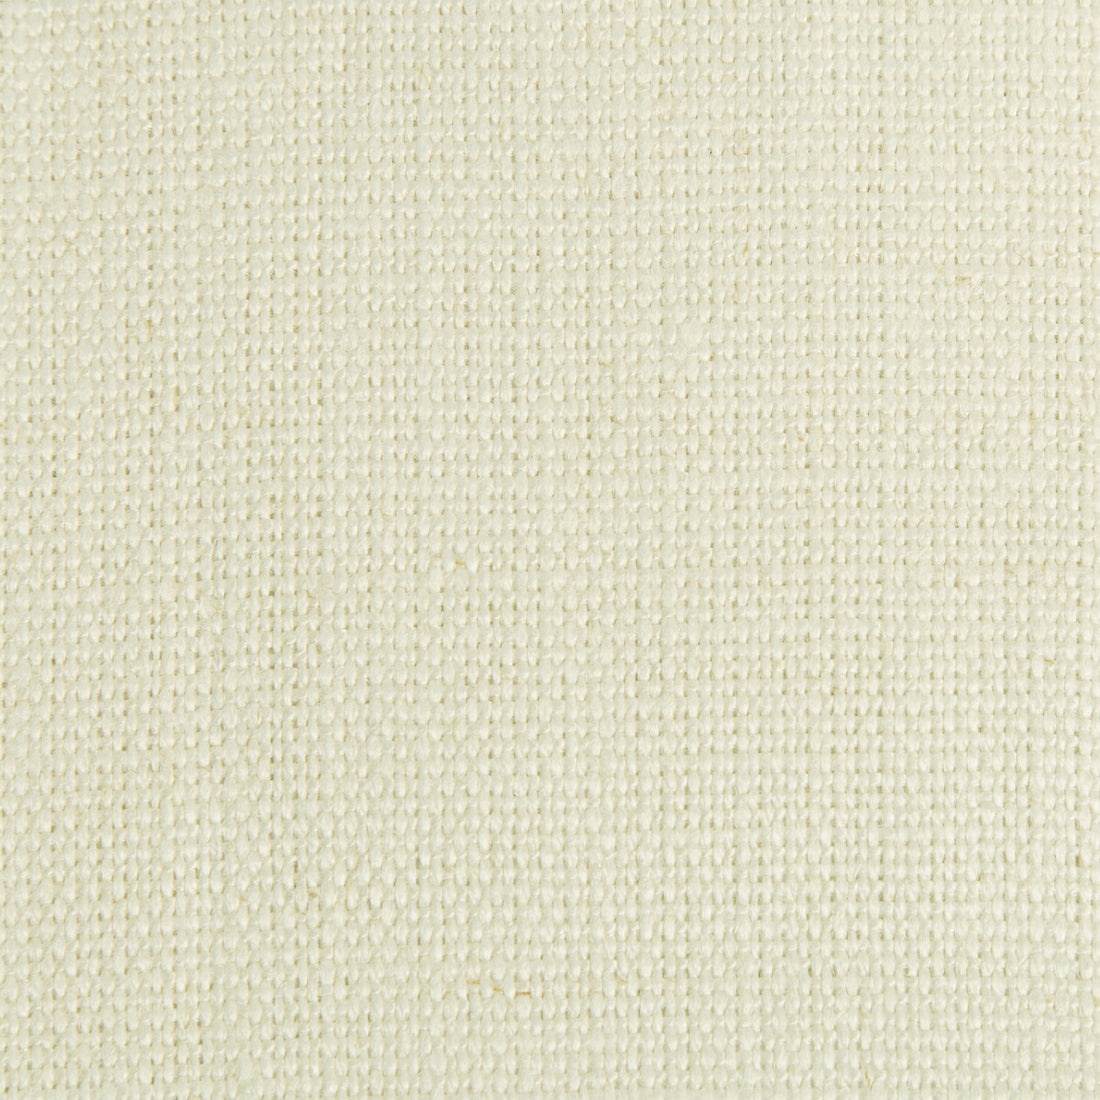 Crissie fabric in snow color - pattern 35977.1001.0 - by Kravet Design in the Barry Lantz Canvas To Cloth collection